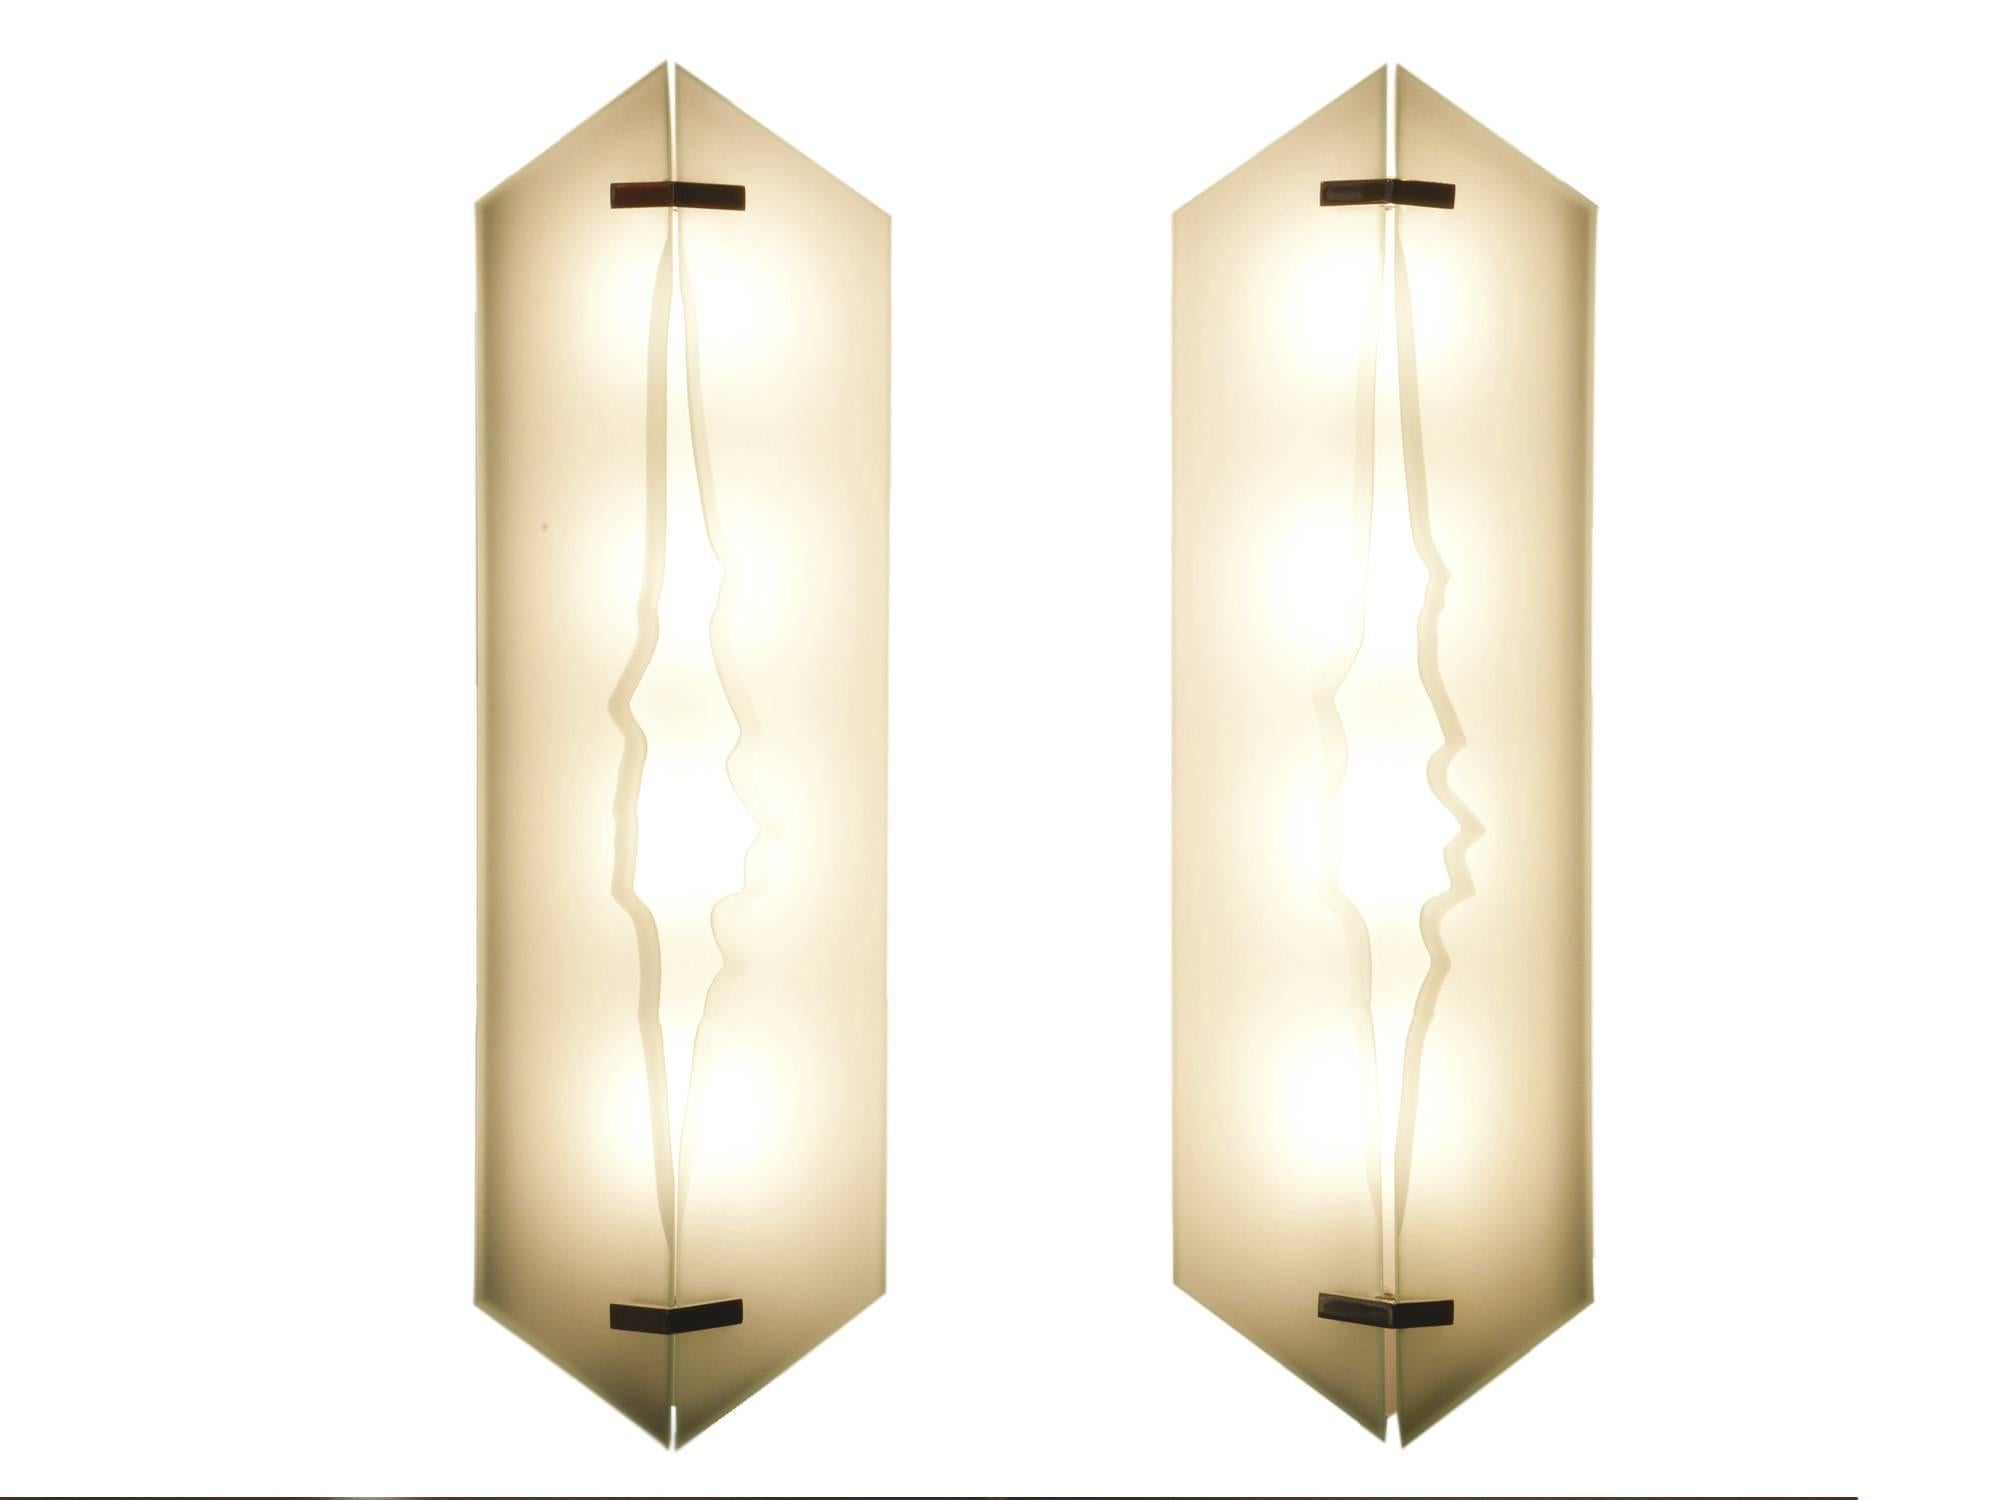 Pair of wall lights
Glass, sandblasted glass, lacquered steel
Italy, circa 1960
Measures: H 62 x W 17 x D 10 cm
H 24 3/8 x W 6 3/4 x D 3 7/8 inch.